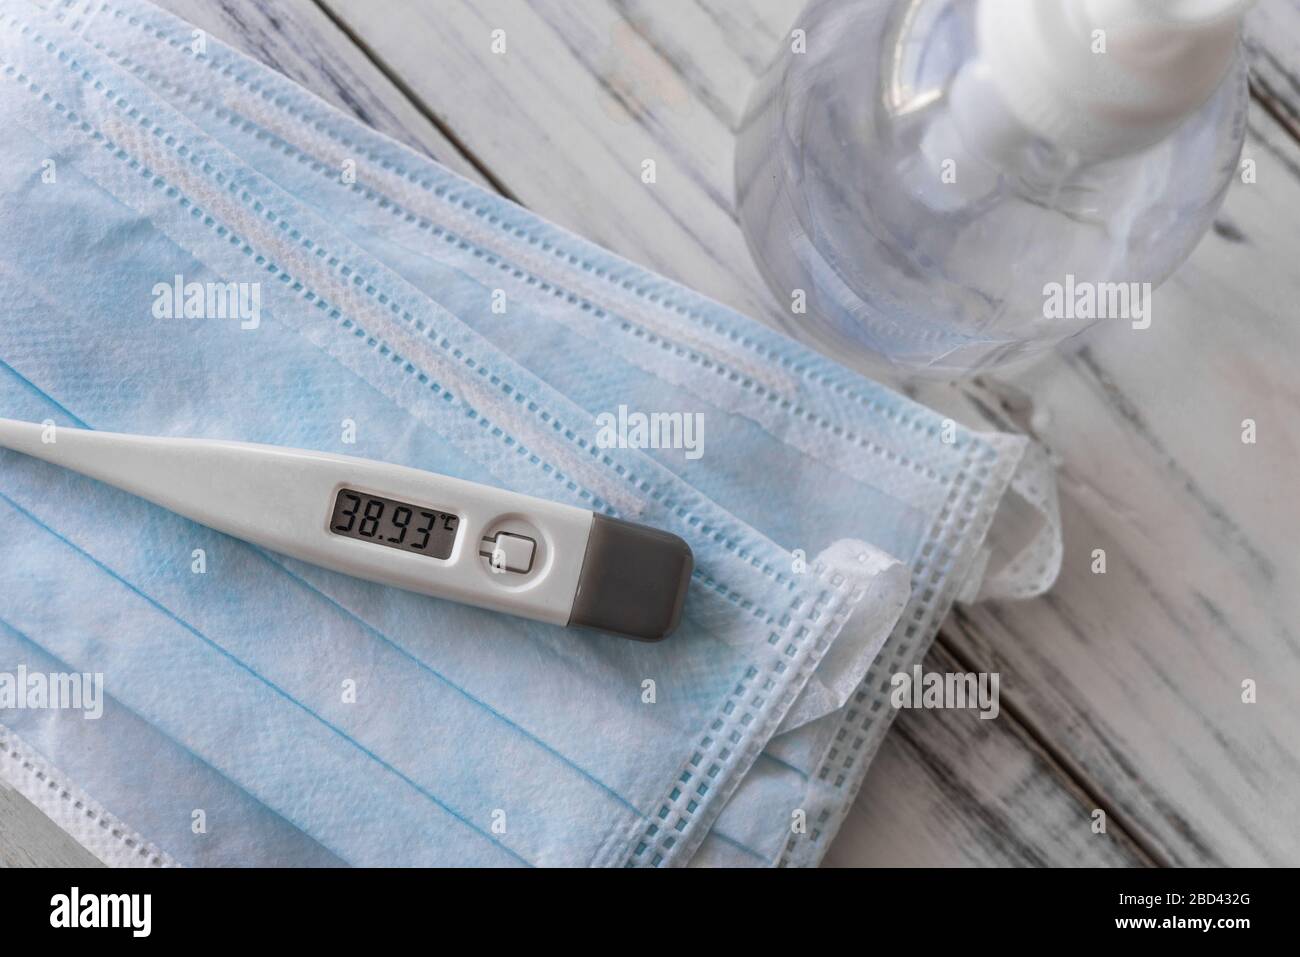 Thermometer with fever, hand sanitizer, and face masks. Coronavirus symptoms. Stock Photo